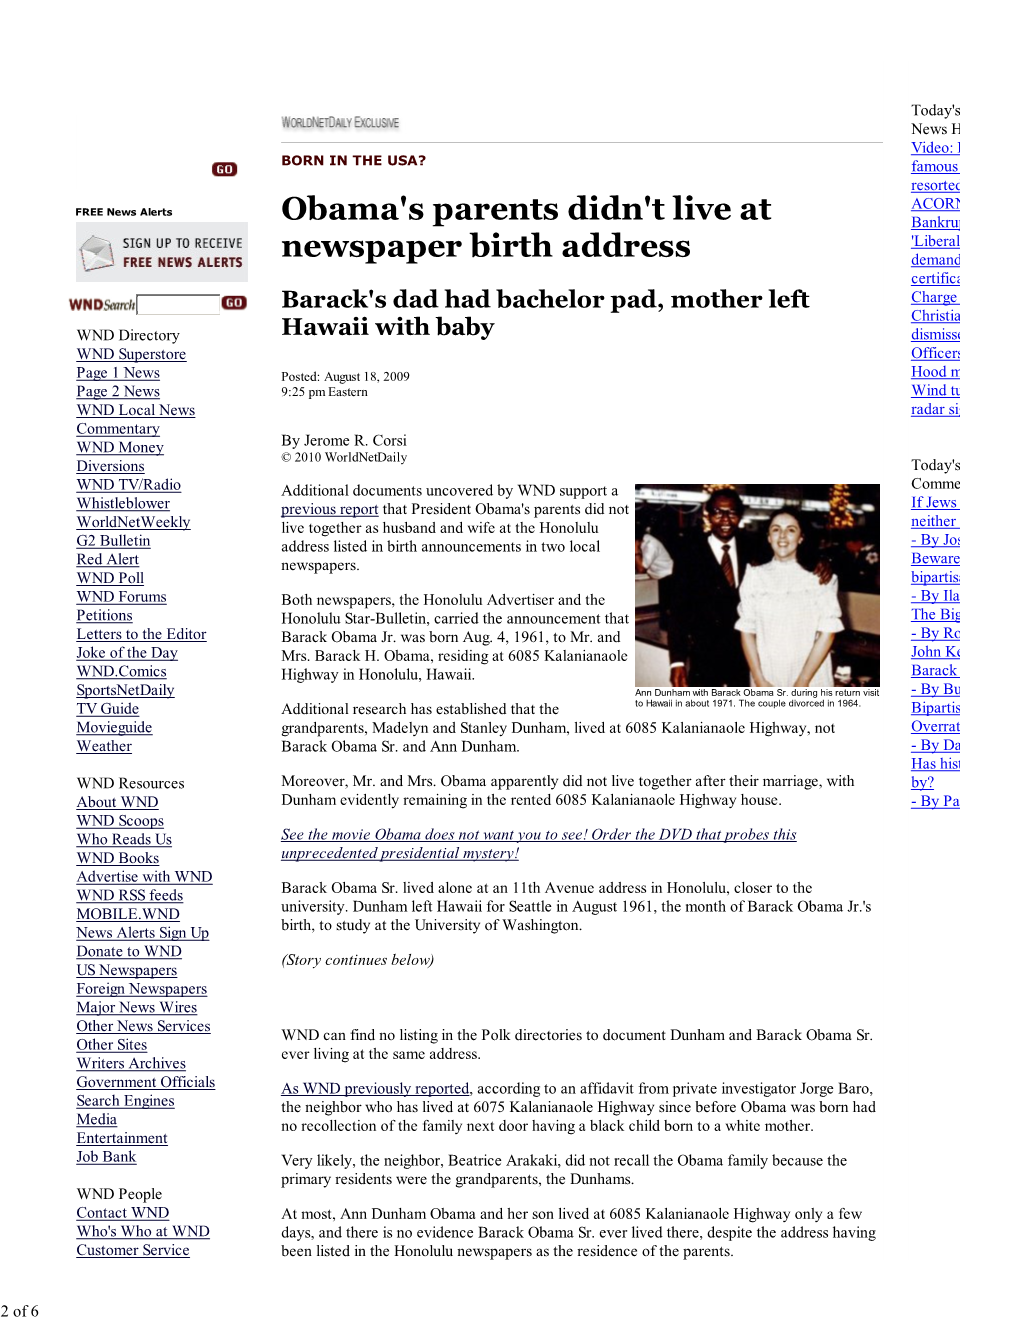 Obama's Parents Didn't Live